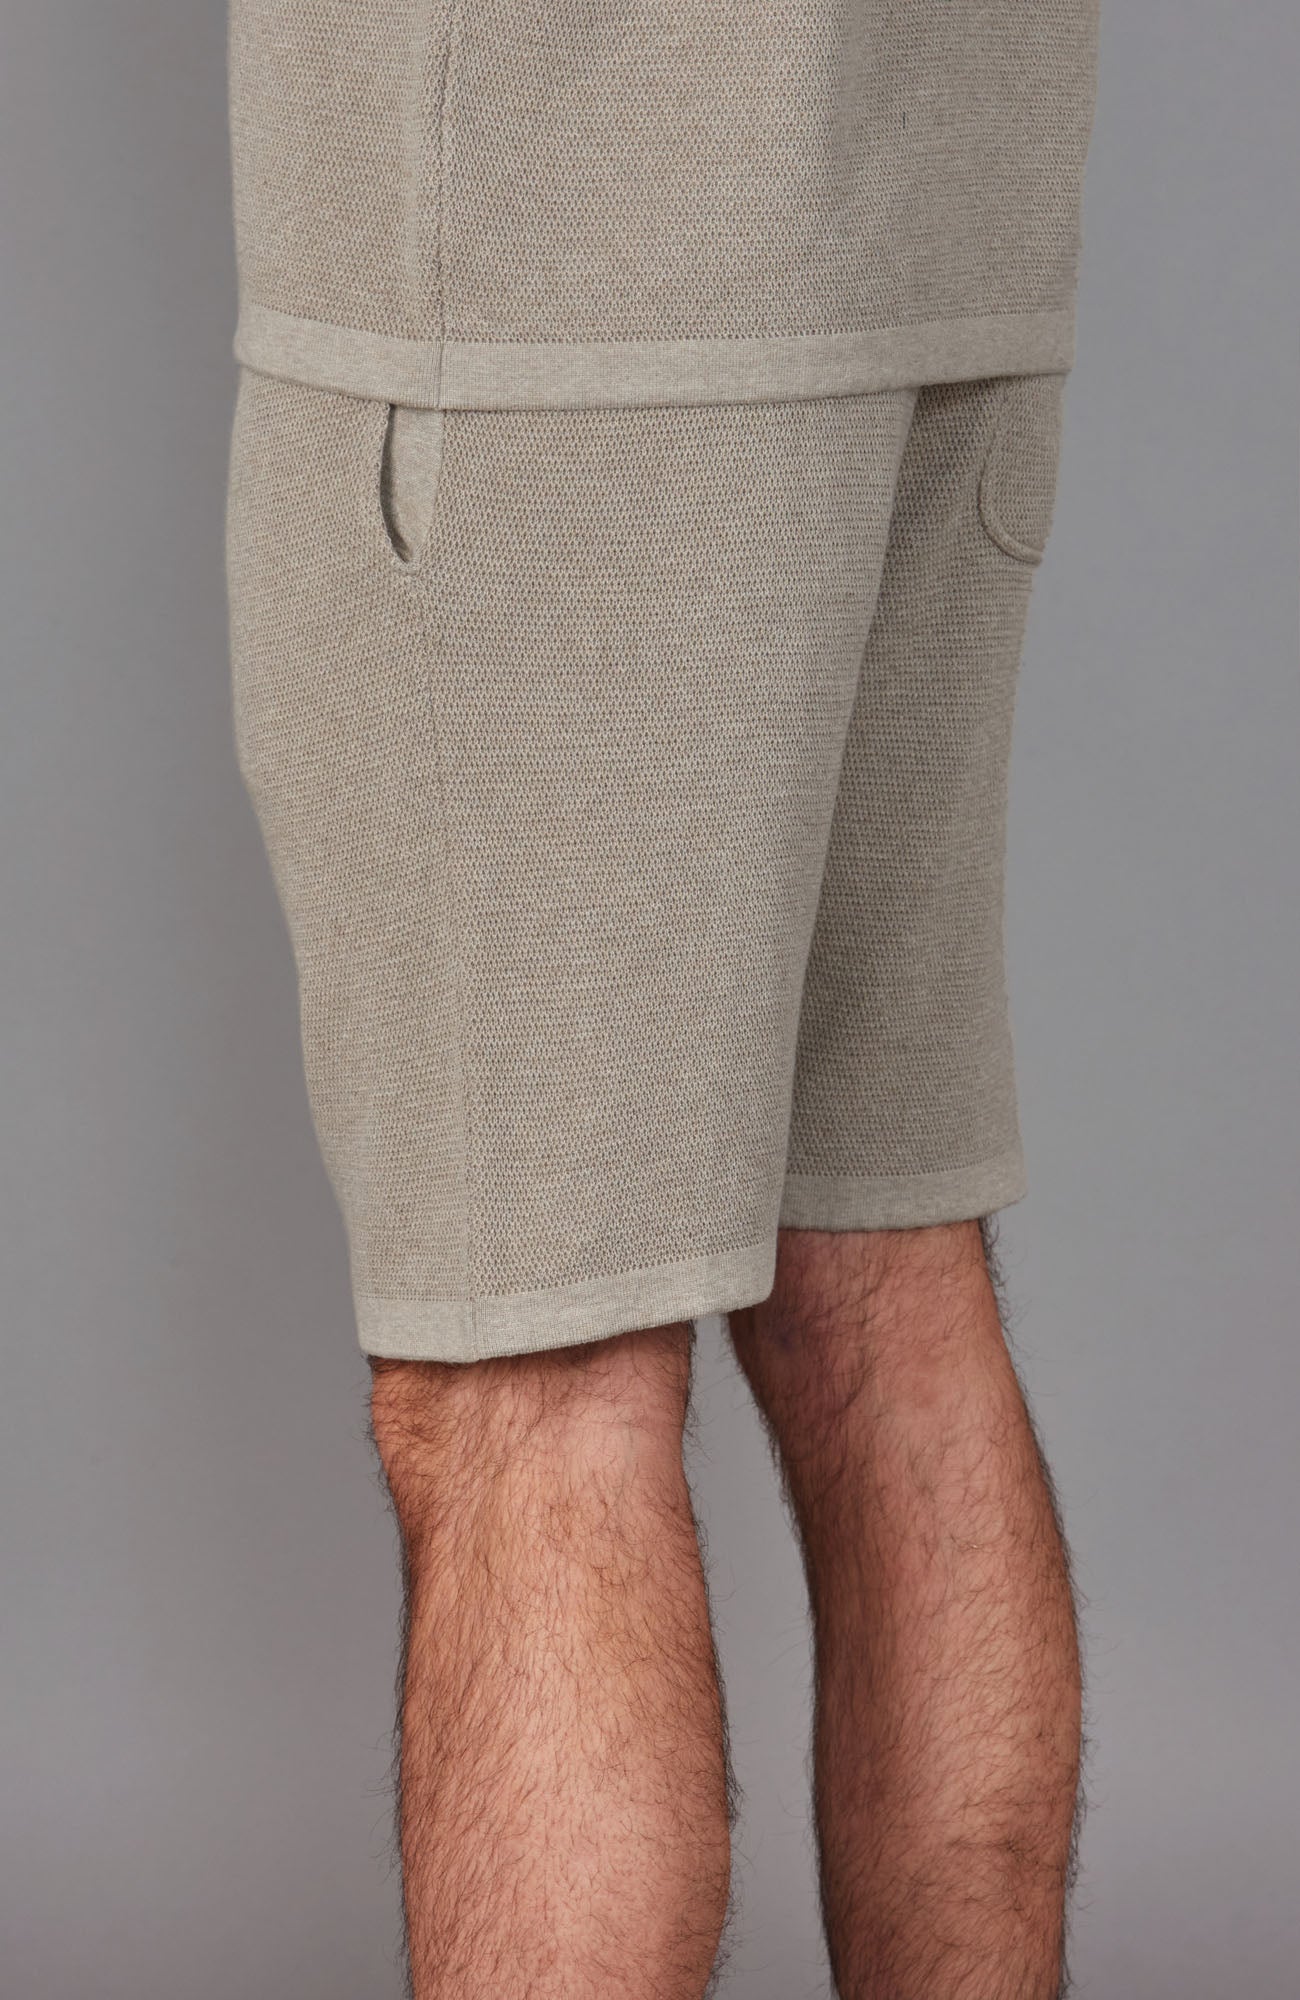 mens beige knitted shorts